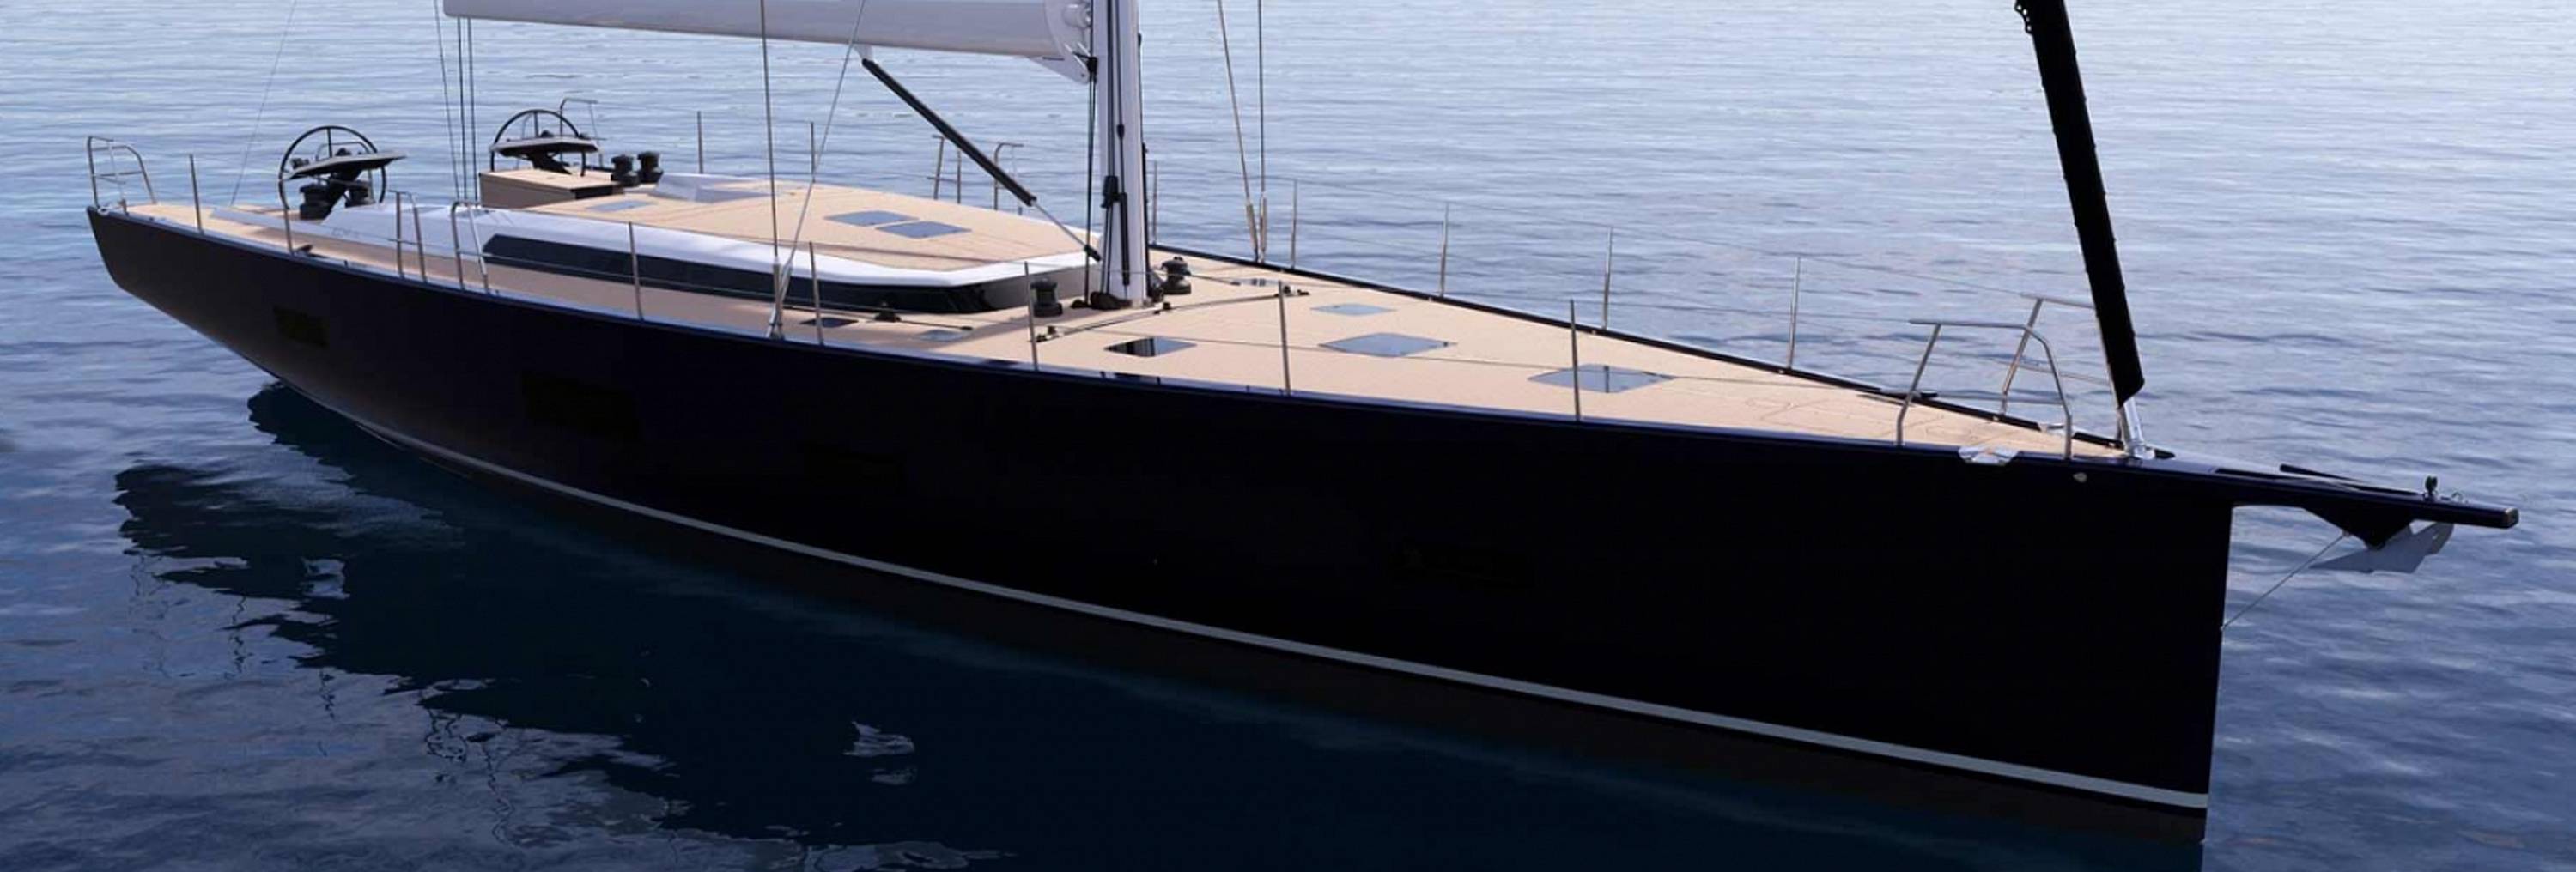 ICE 70 New | Exhibited at the Cannes Yachting Festival 2021